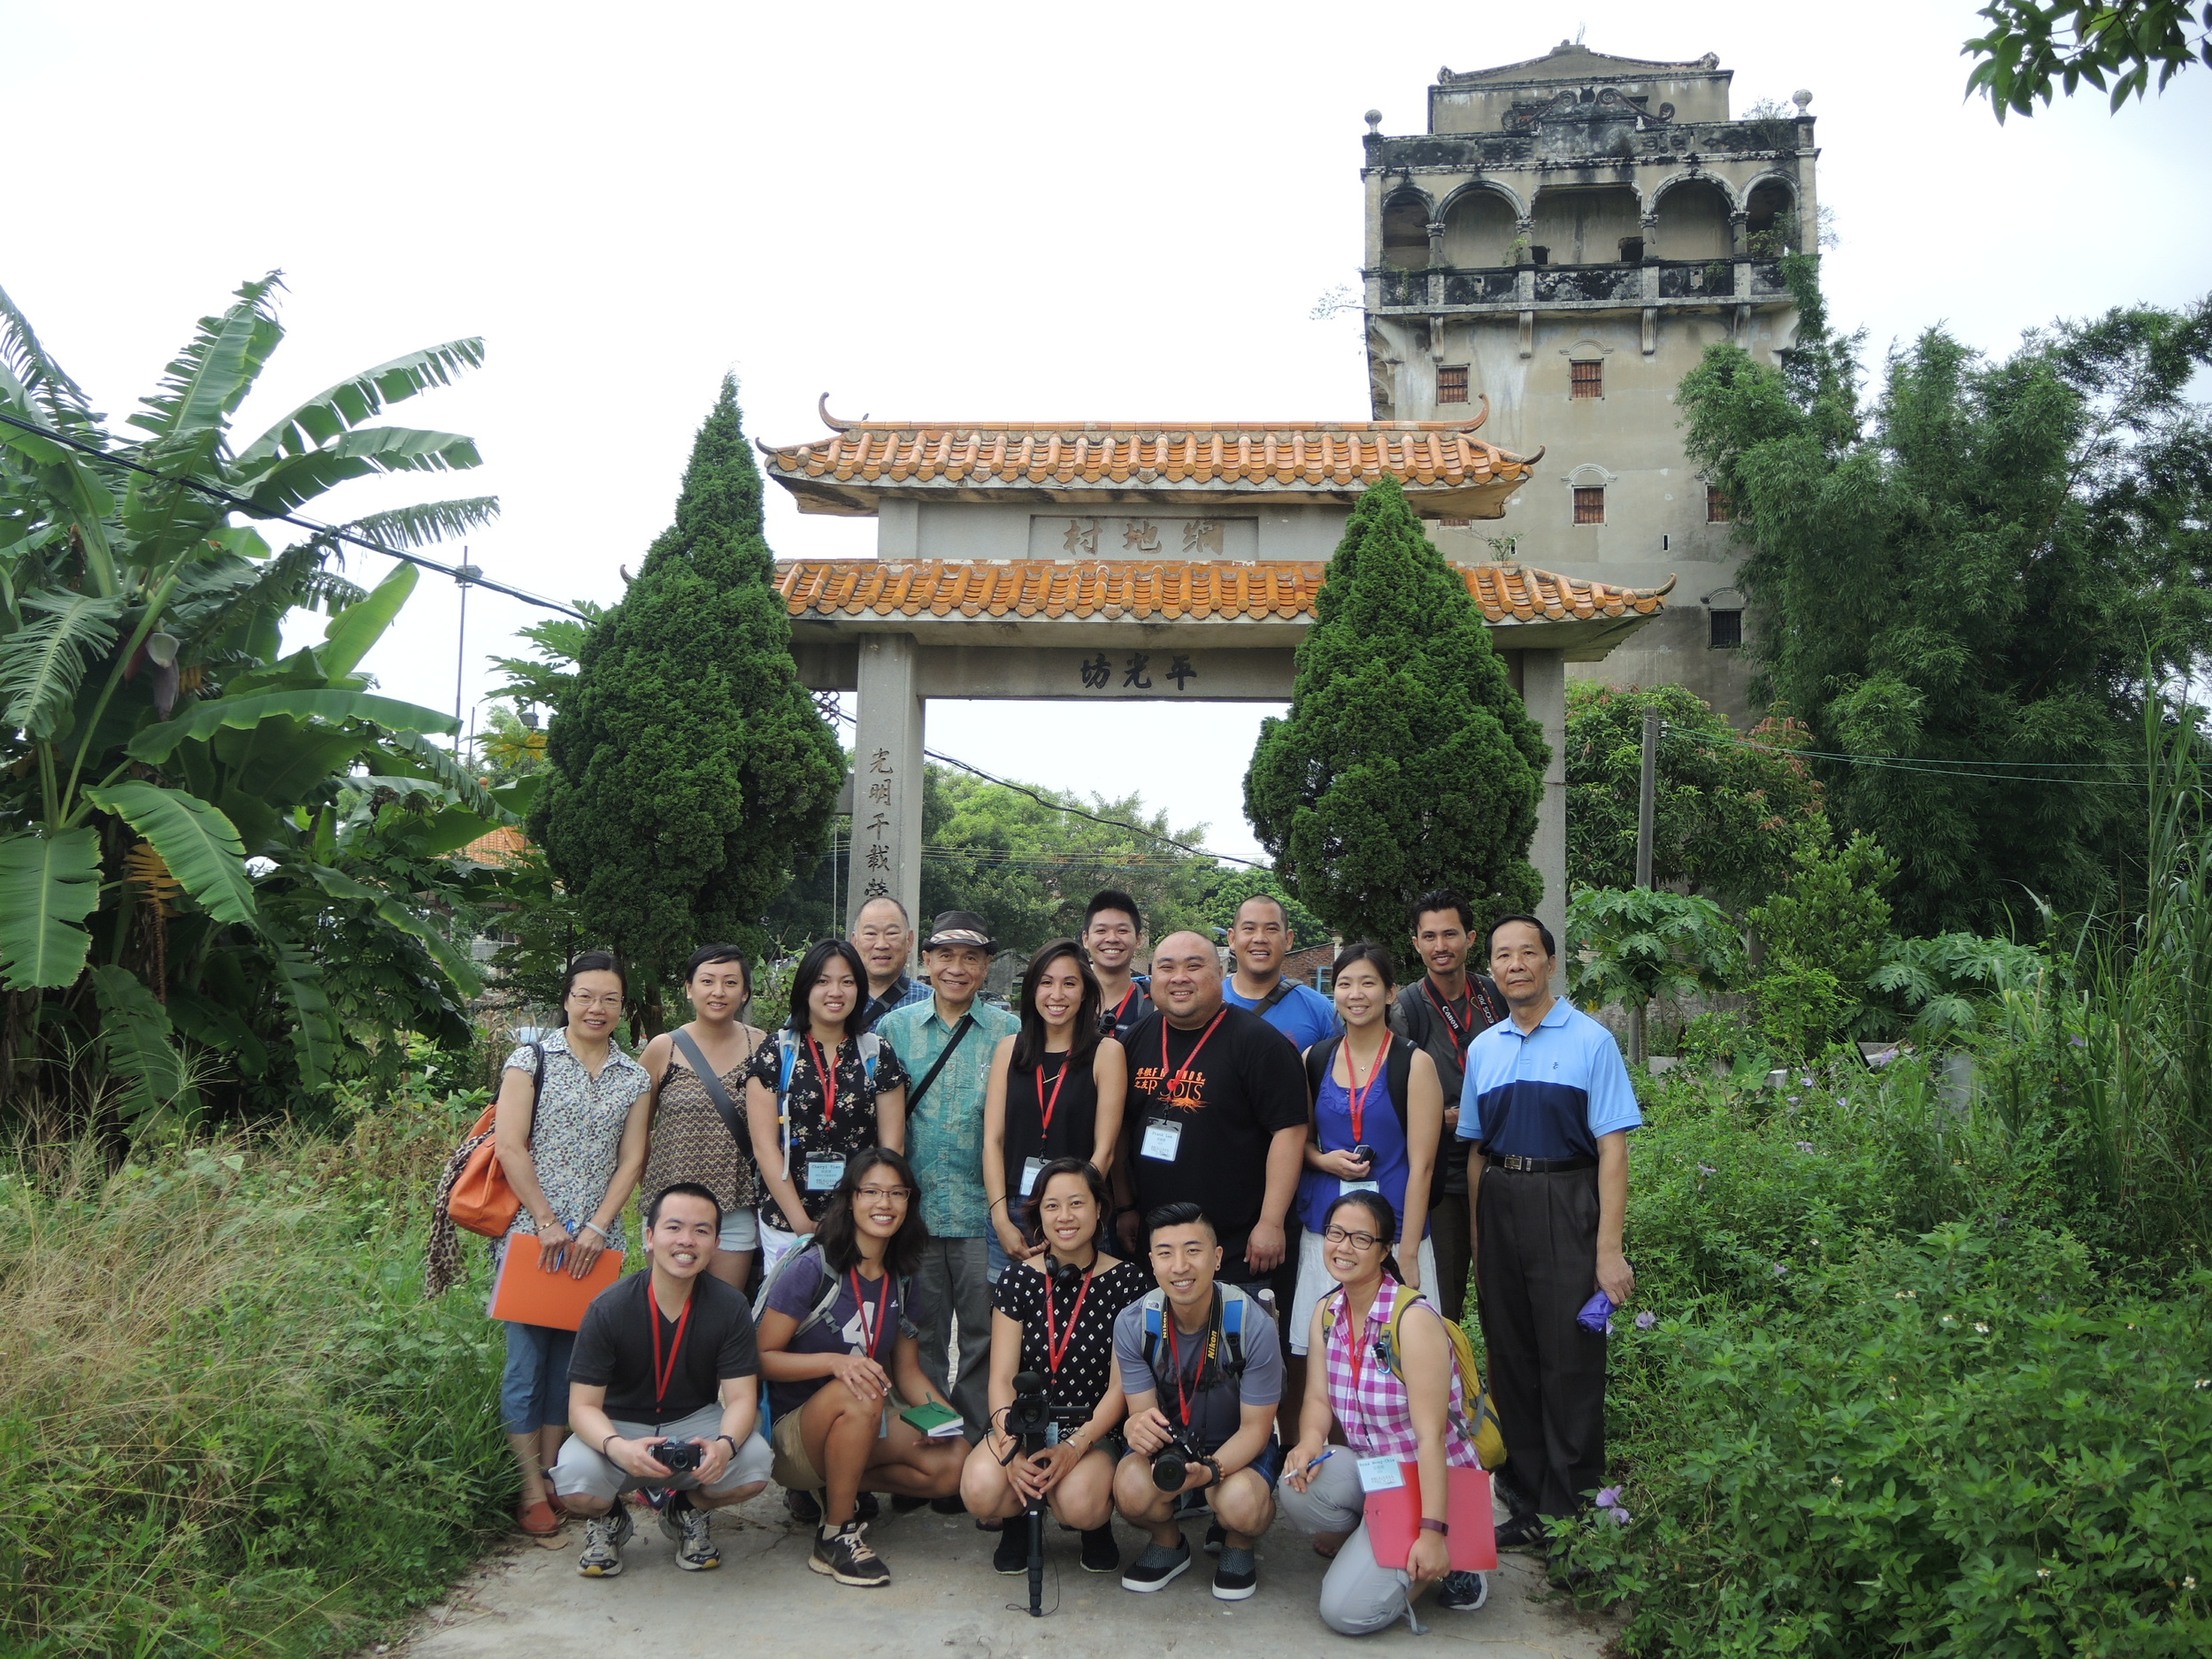 The 2015 Roots cohort in front of Michelle's maternal grandmother's village, Bok Saa